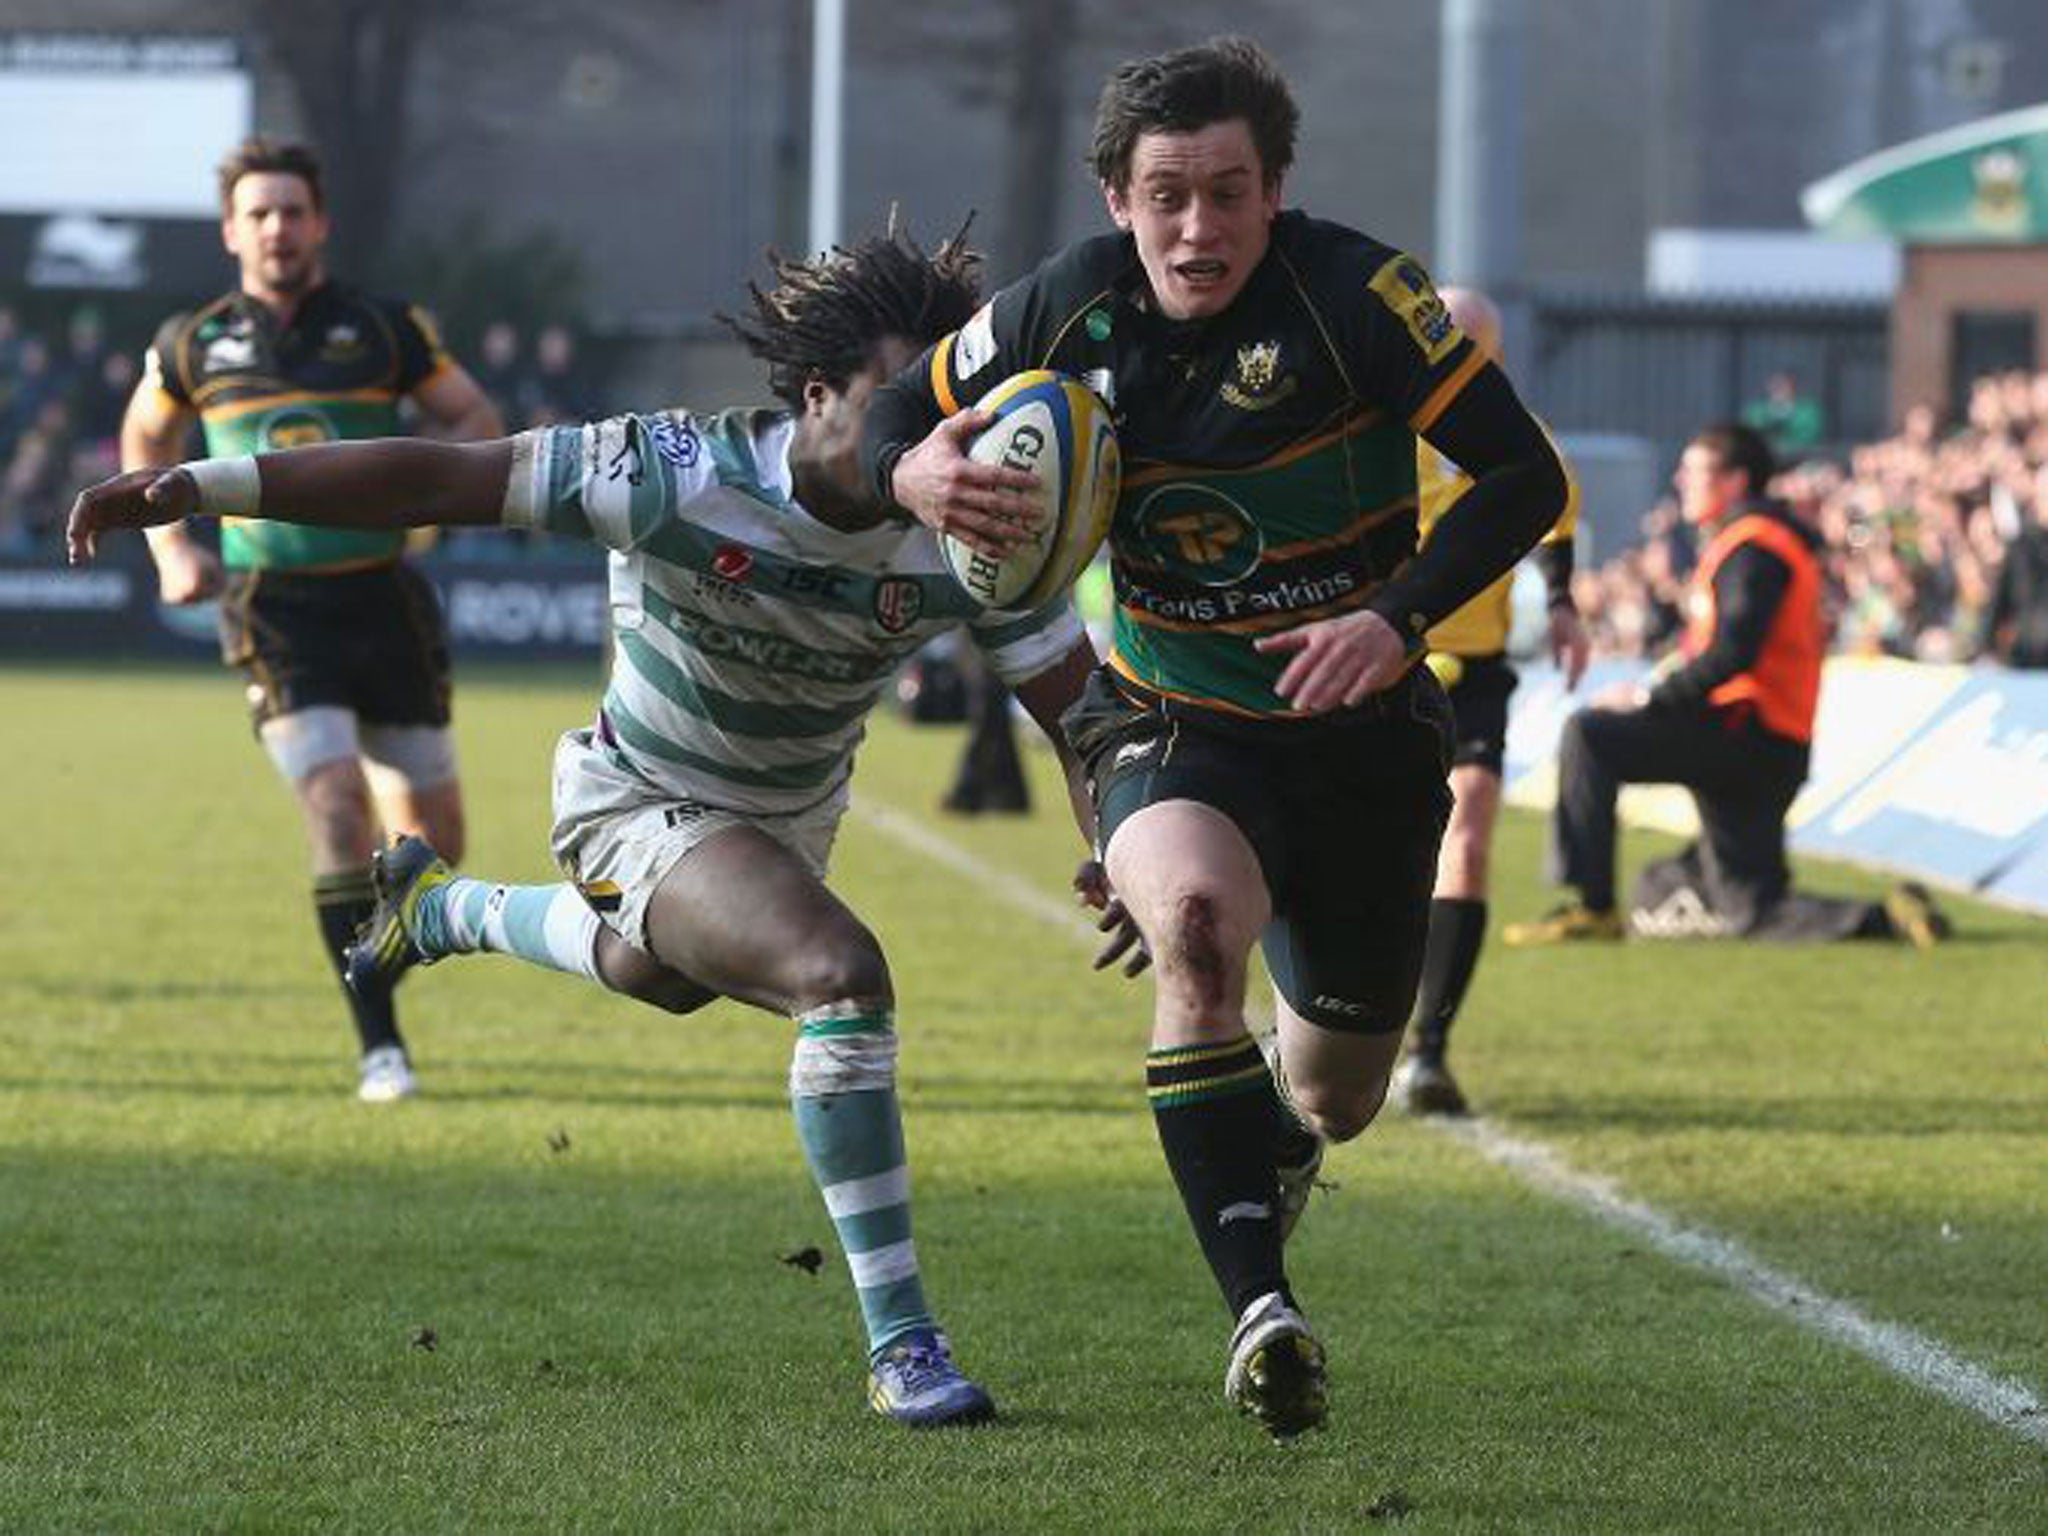 Jamie Elliott, the 20-year-old product of Northampton’s academy, scored three tries and denied the Irish one with his intelligent covering